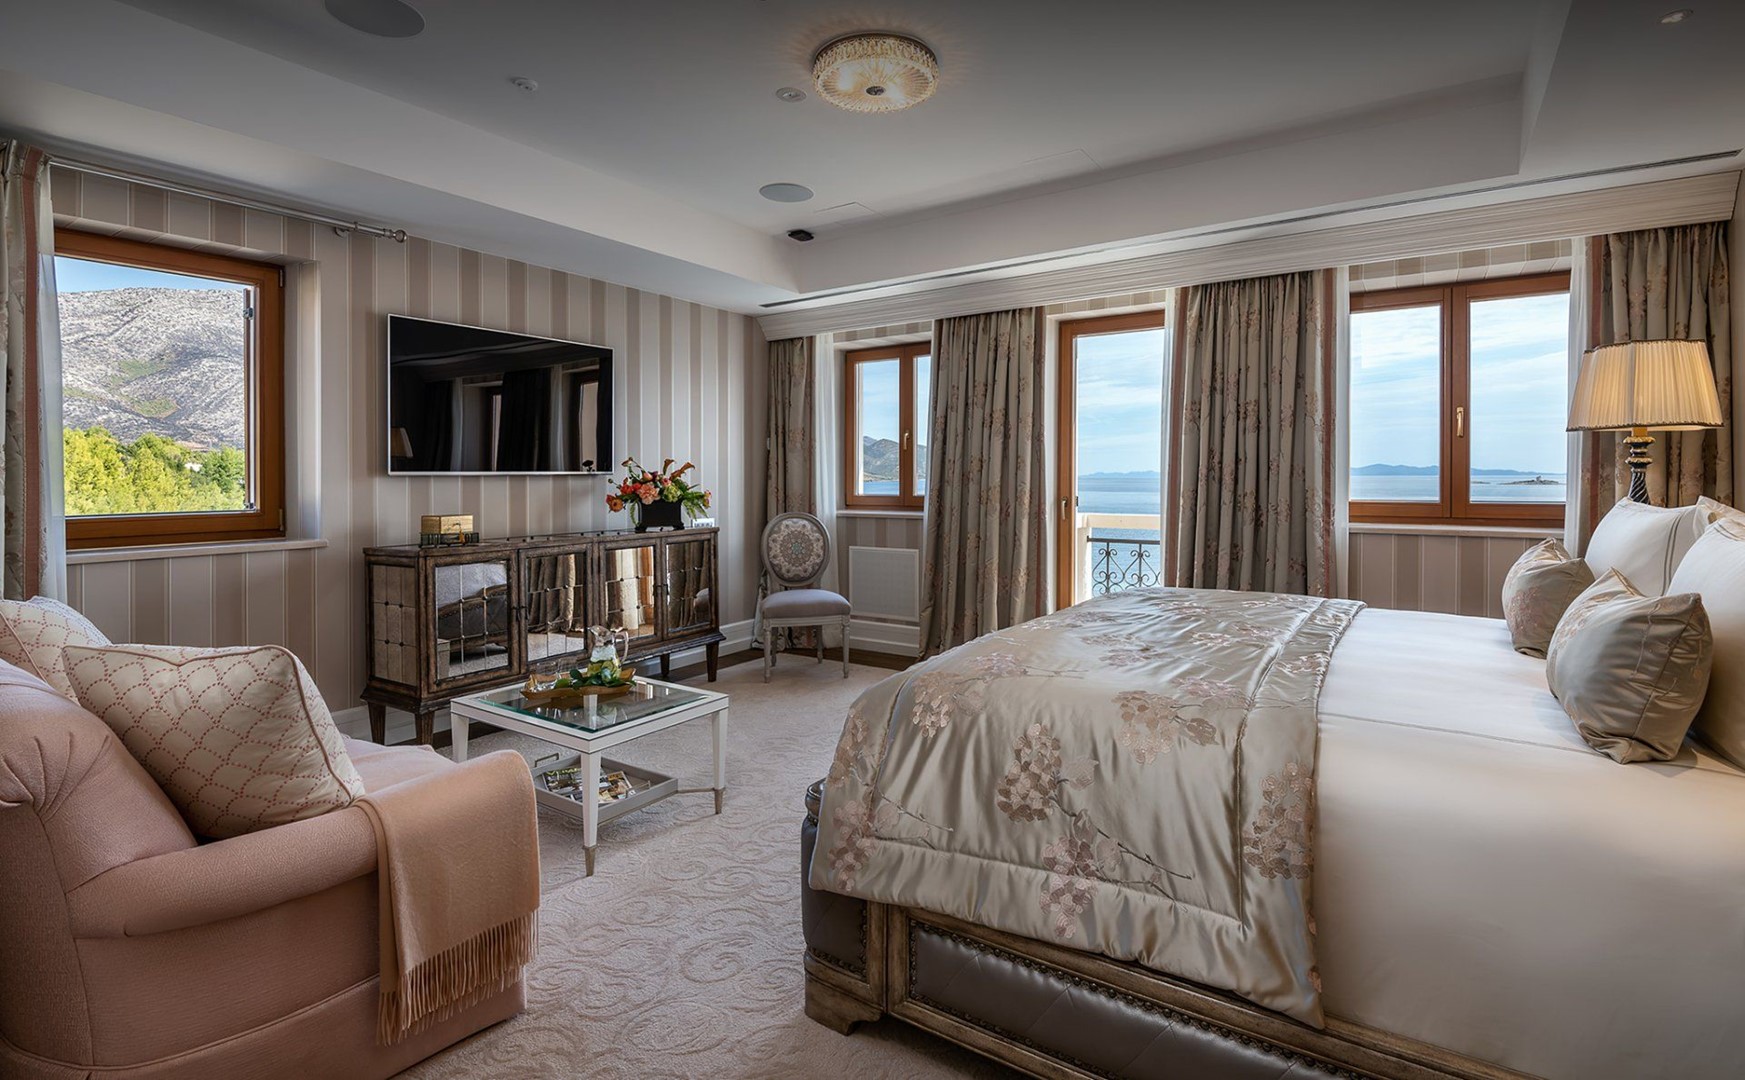 King size bed and seating area in a bedroom of a luxury beachfront apartment with shared pool and parking